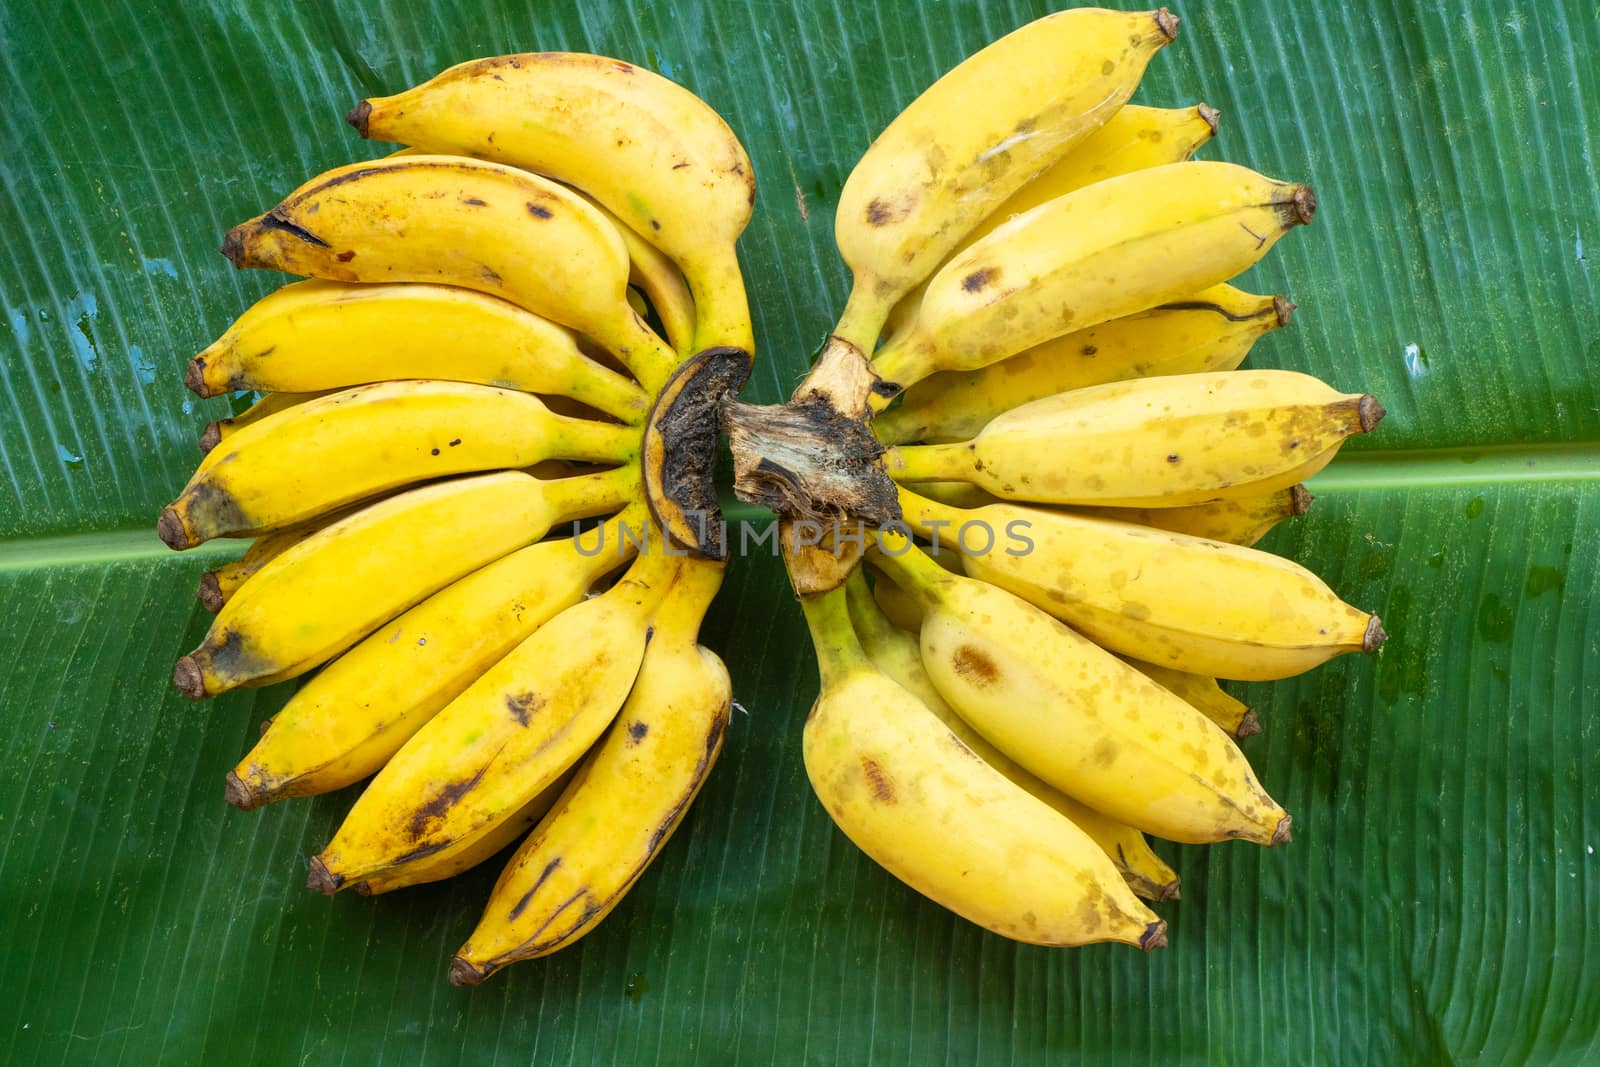 A branch of juicy yellow bananas on a green banana leaf. Ripe juicy fruits